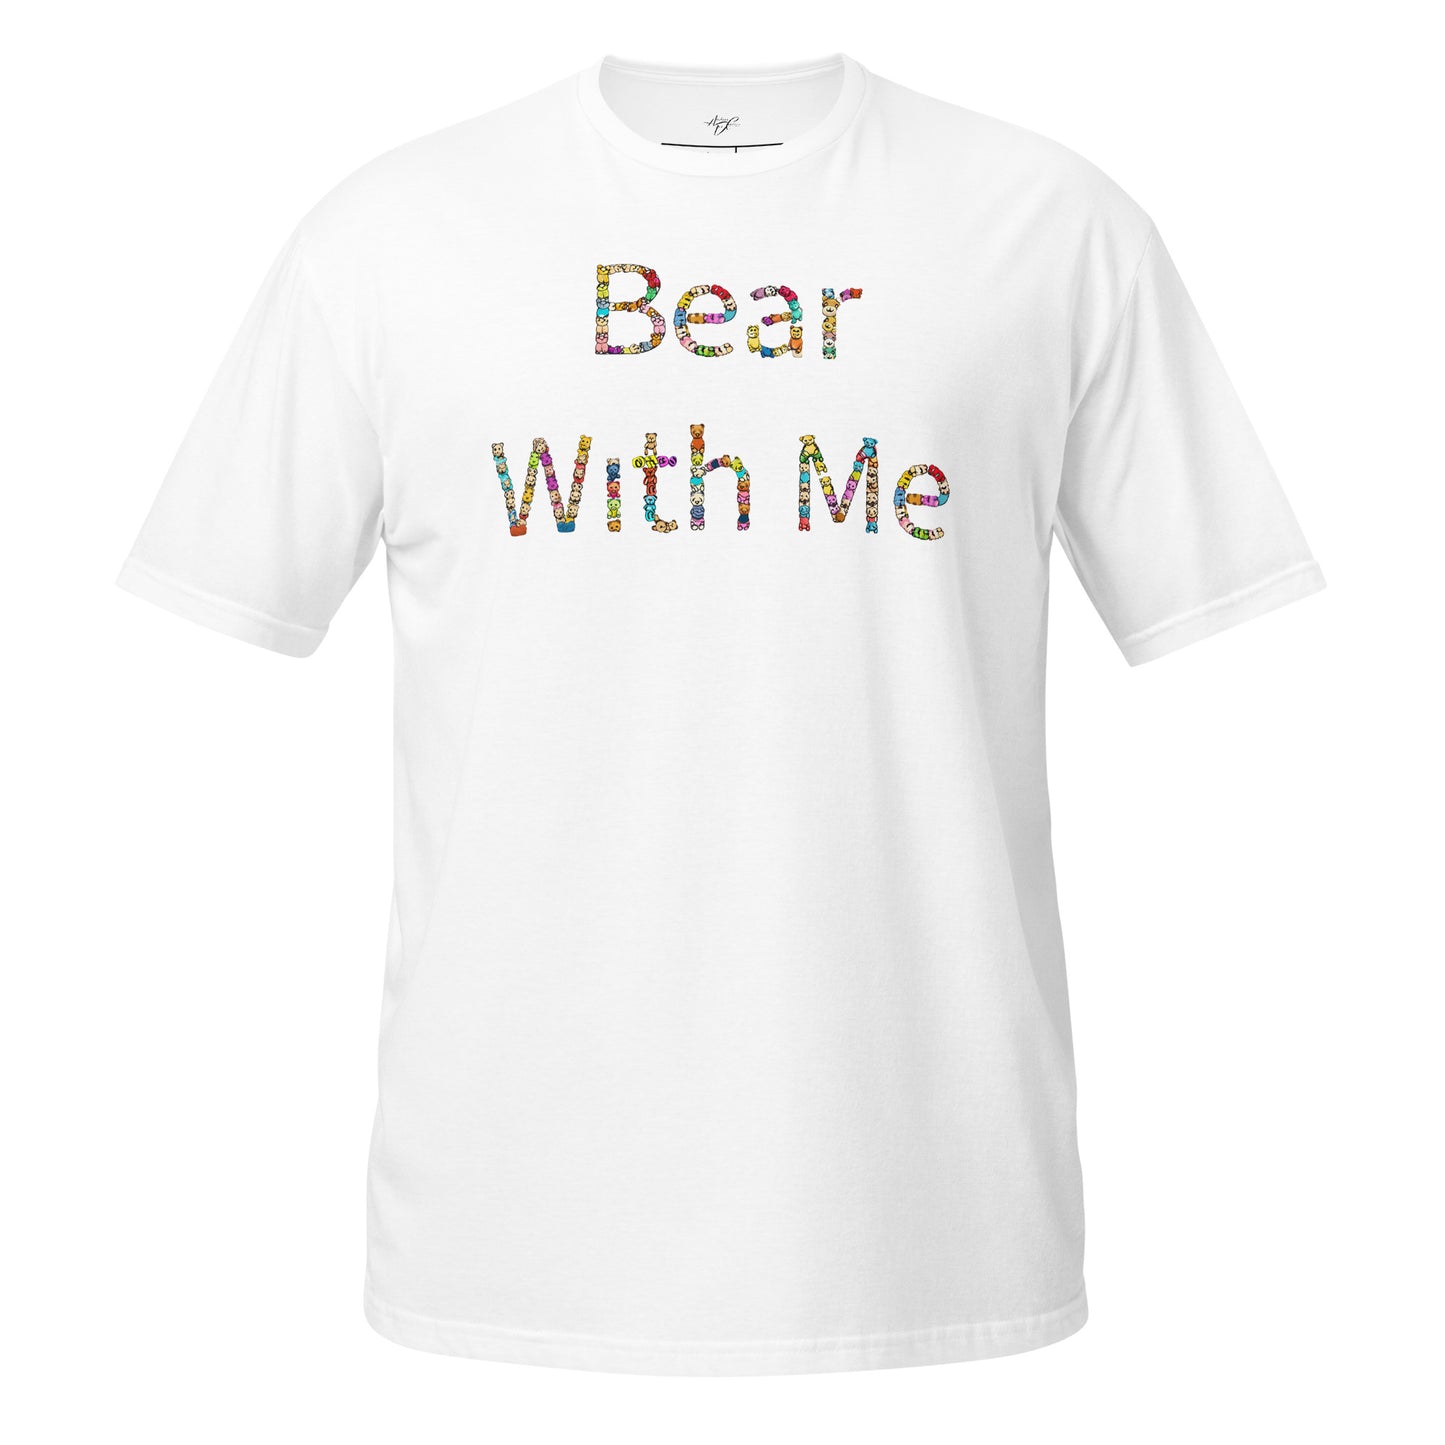 "Bear With Me" Colorful Teddy Bear Pattern T-Shirt